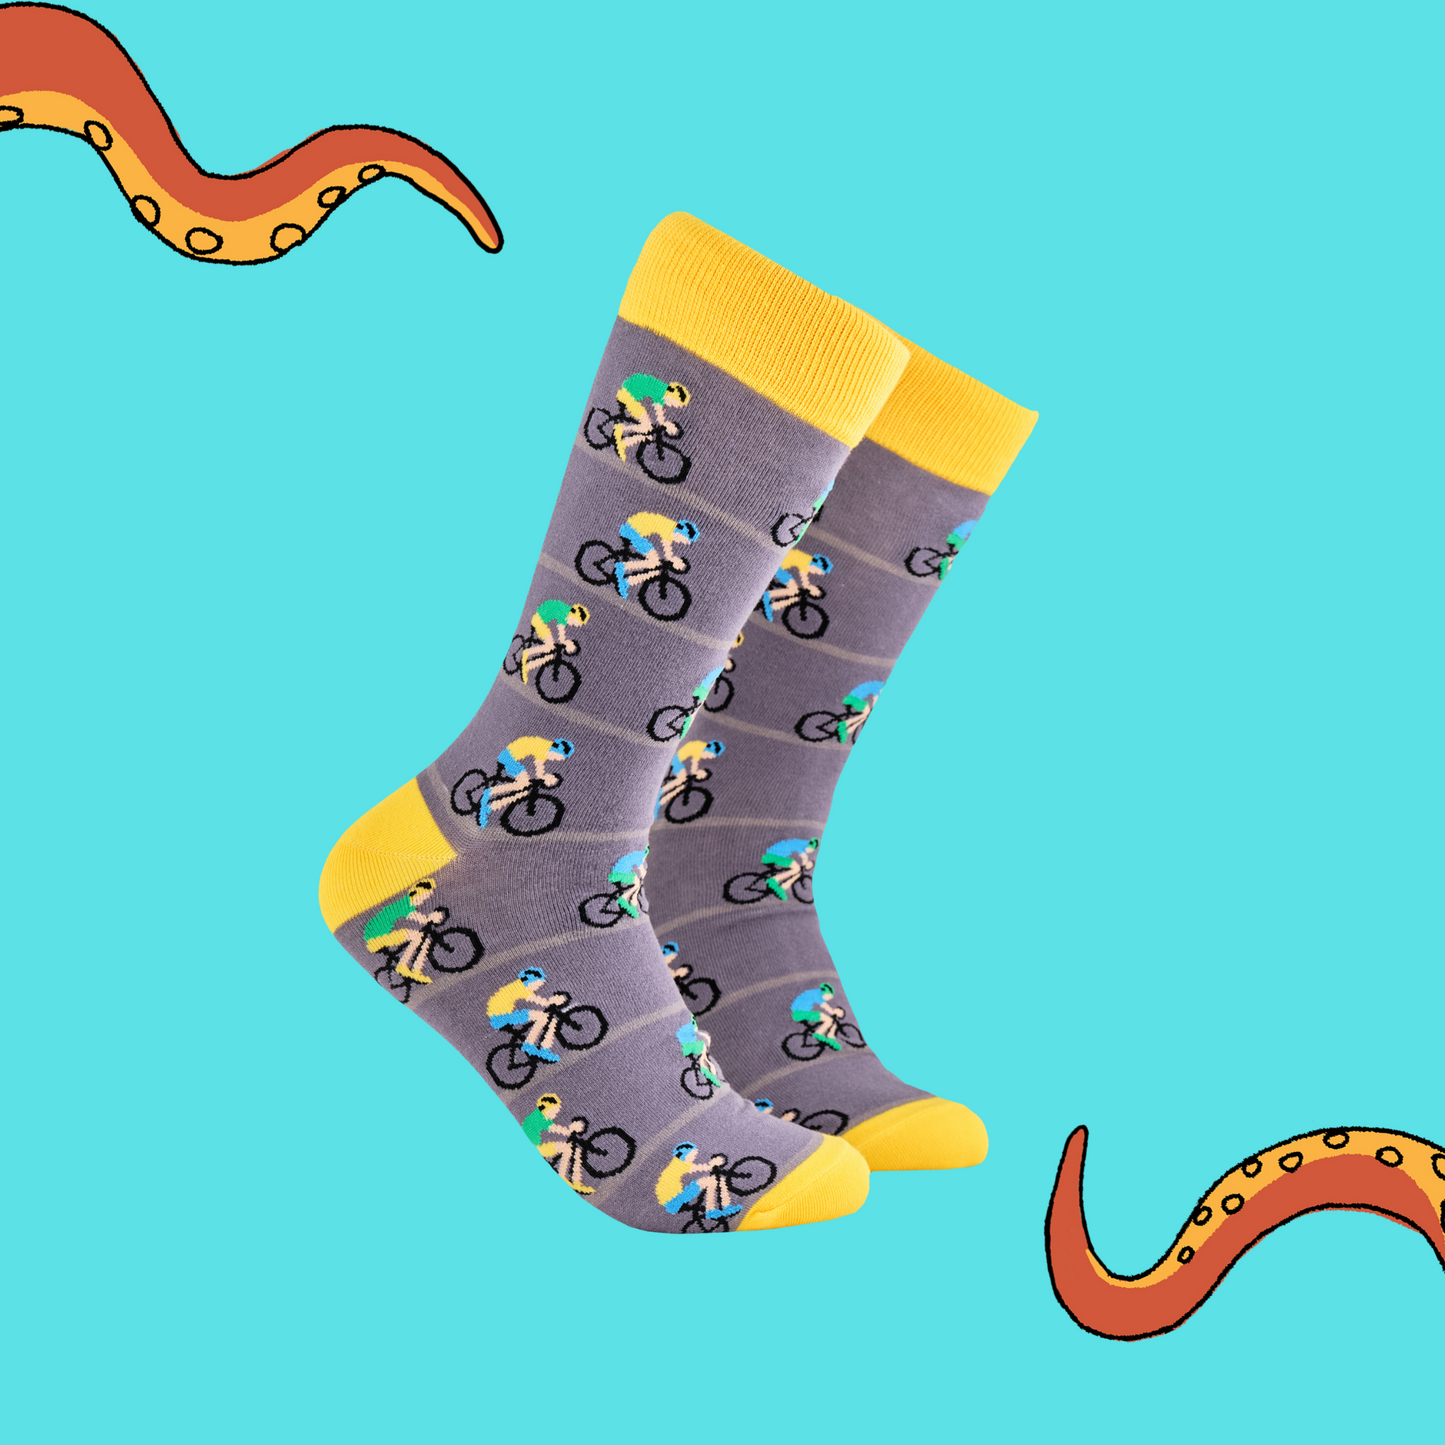 A pair of socks depicting racing cycles. Grey legs, yellow cuff, heel and toe.